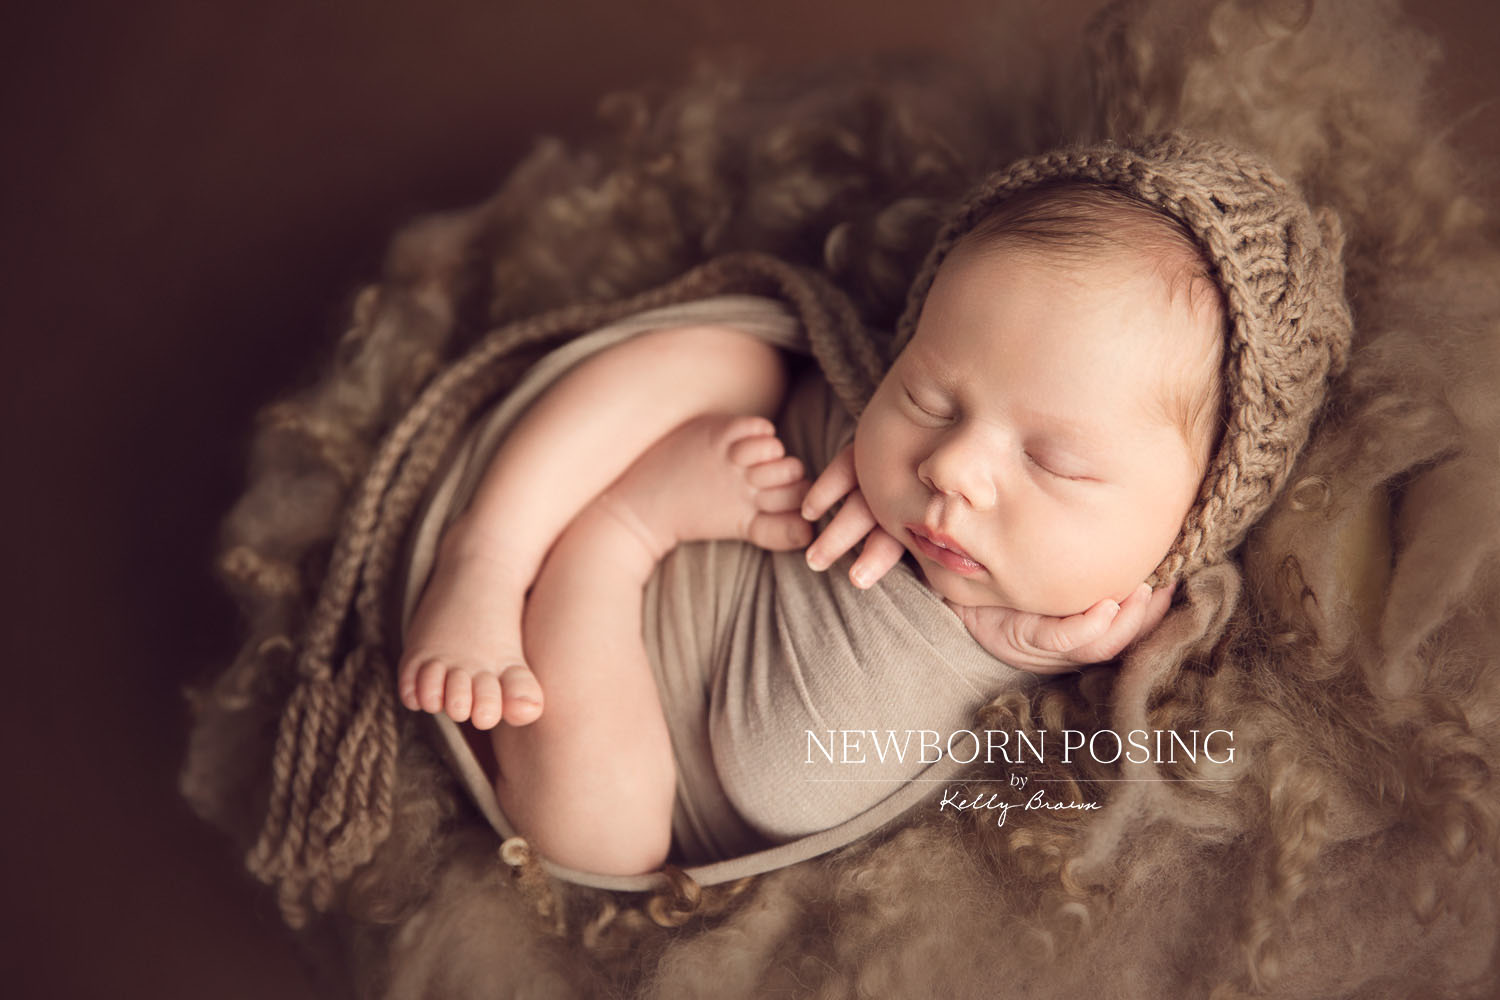 Newborn photography of baby with a beanie